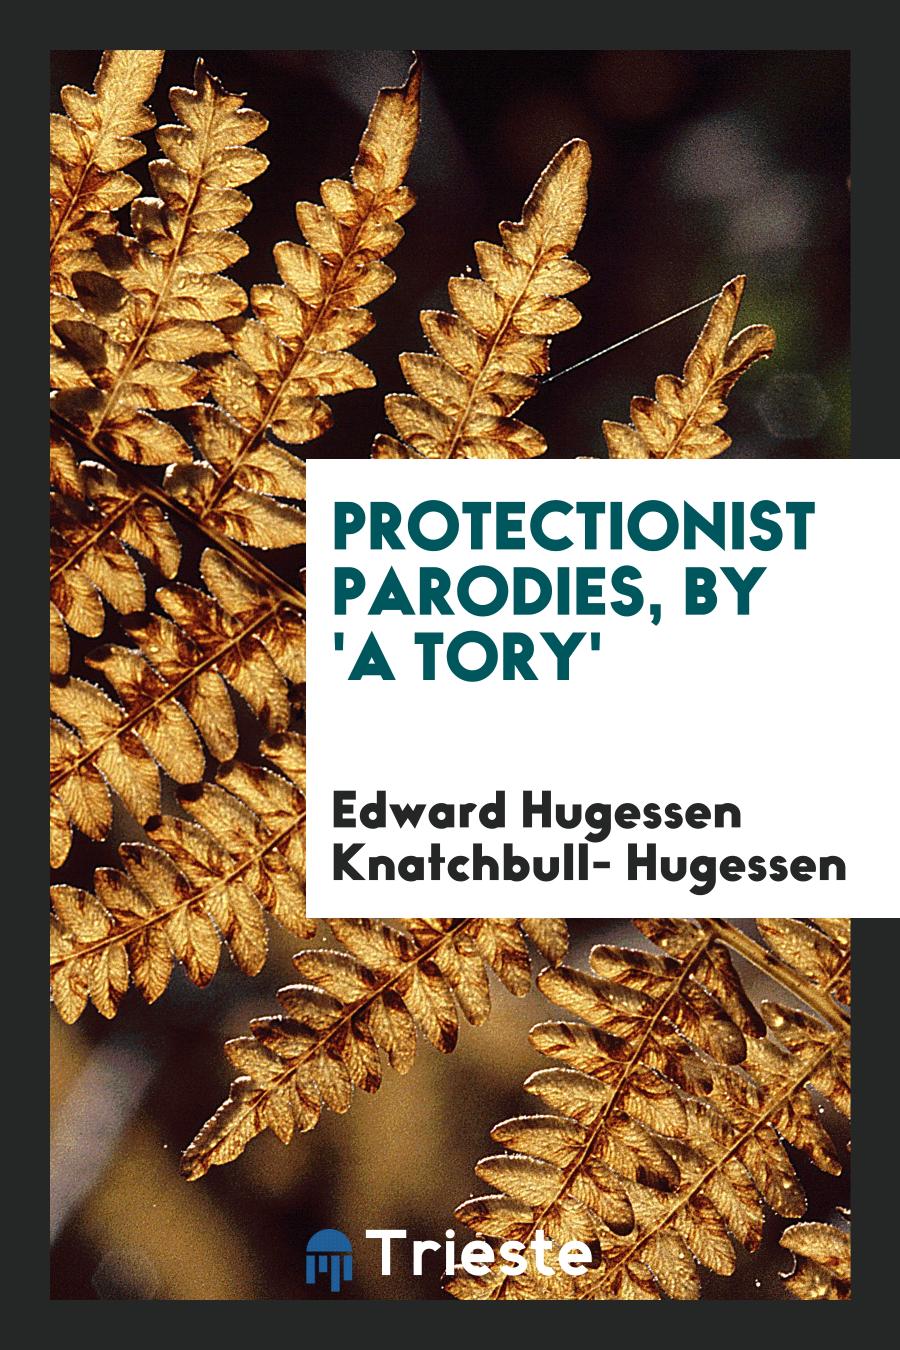 Protectionist parodies, by 'a Tory'